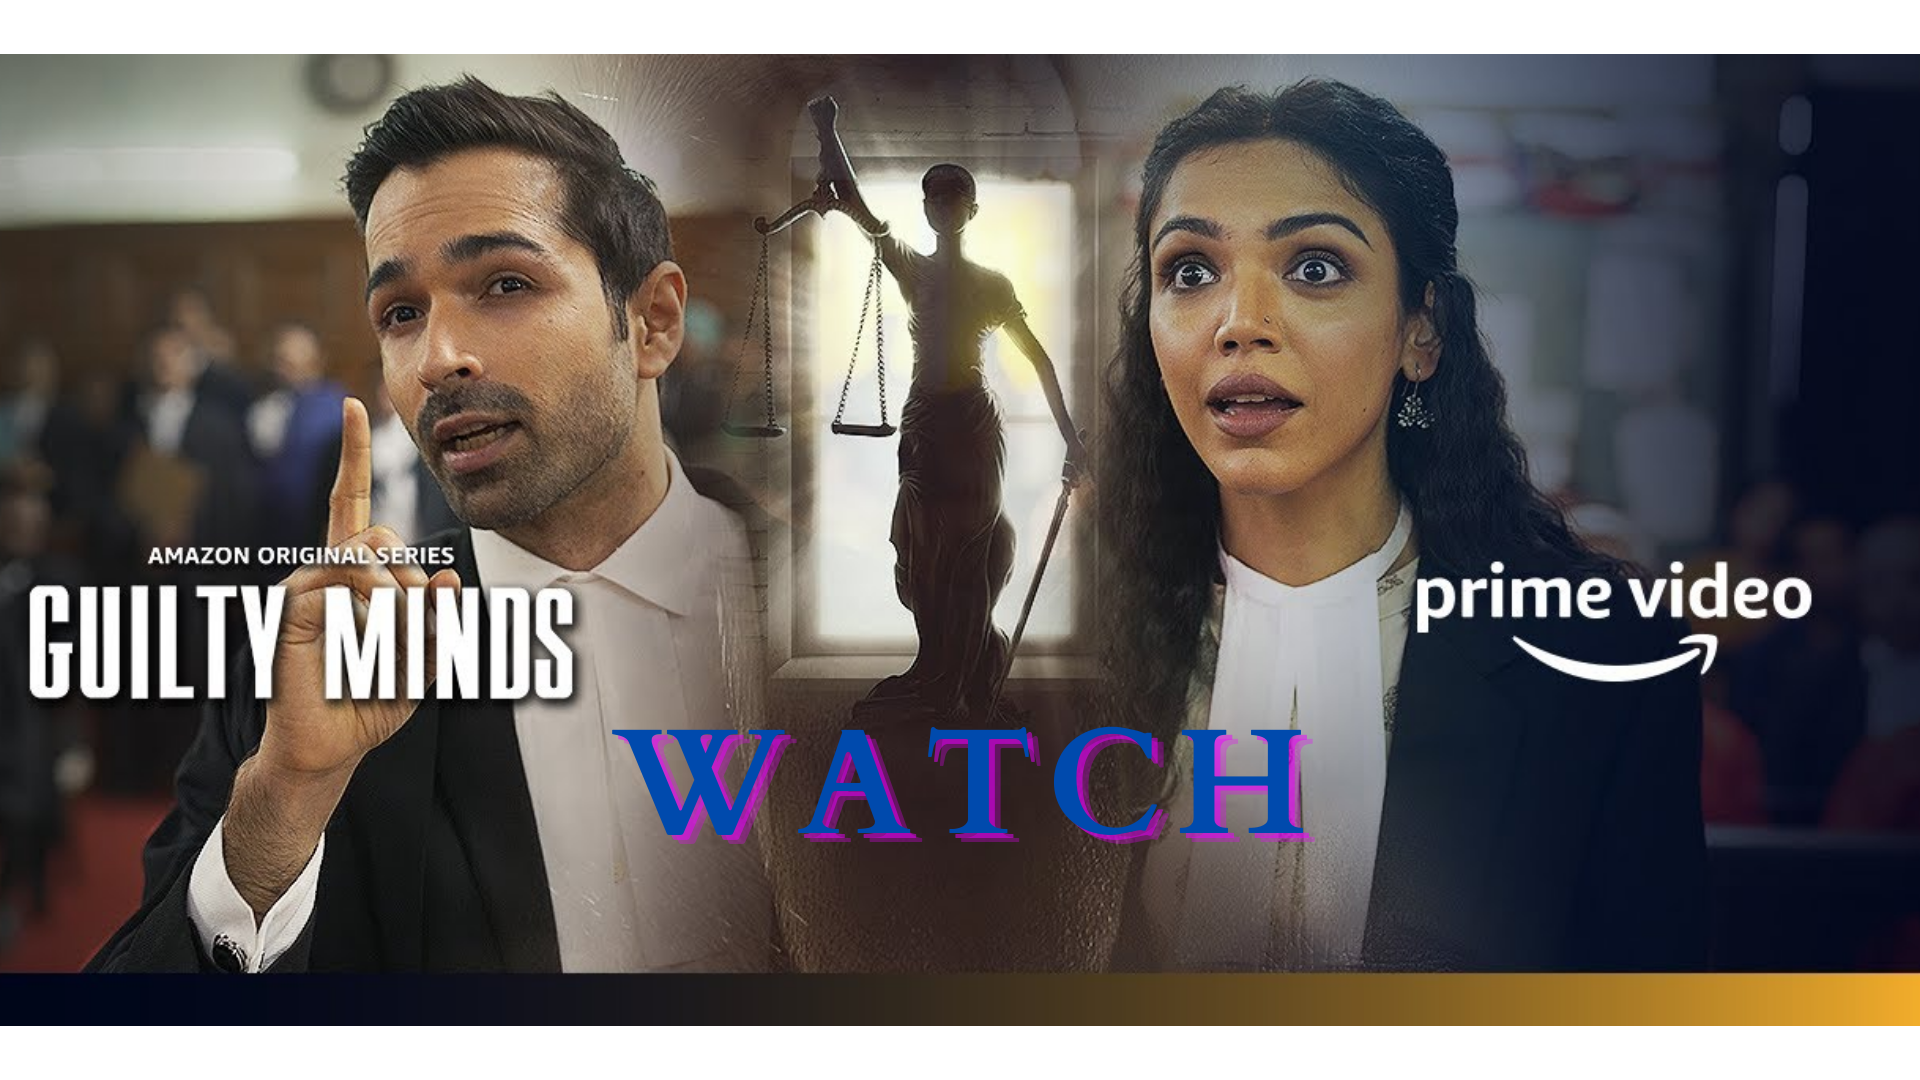 How To Watch Guilty Minds Online For Free?